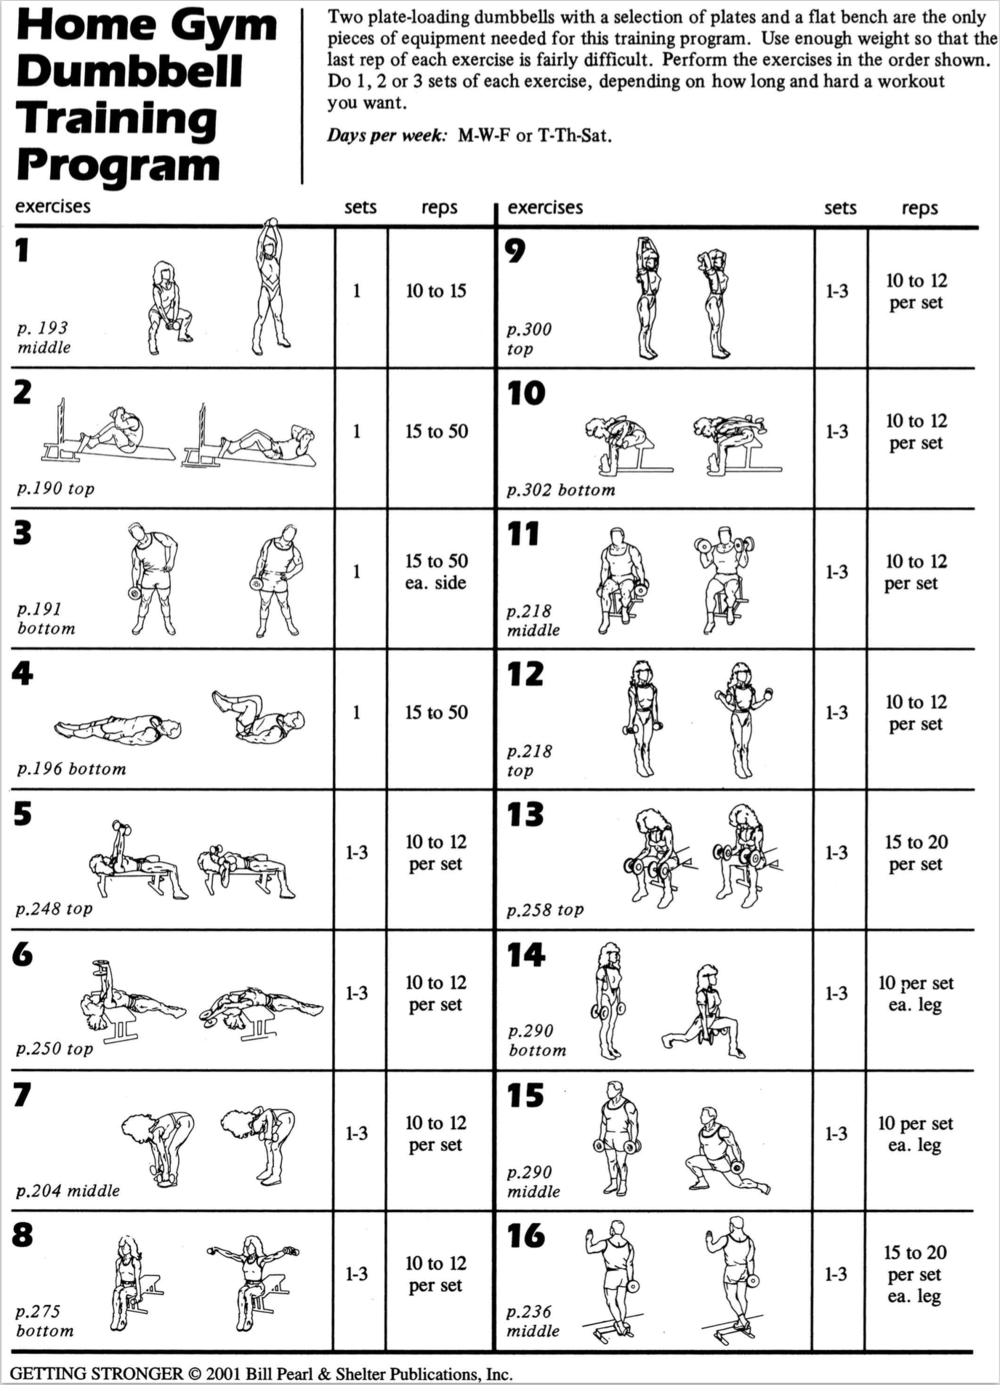 CLICK TO DOWNLOAD A PRINTABLE PDF | Workout | Workout routines for 